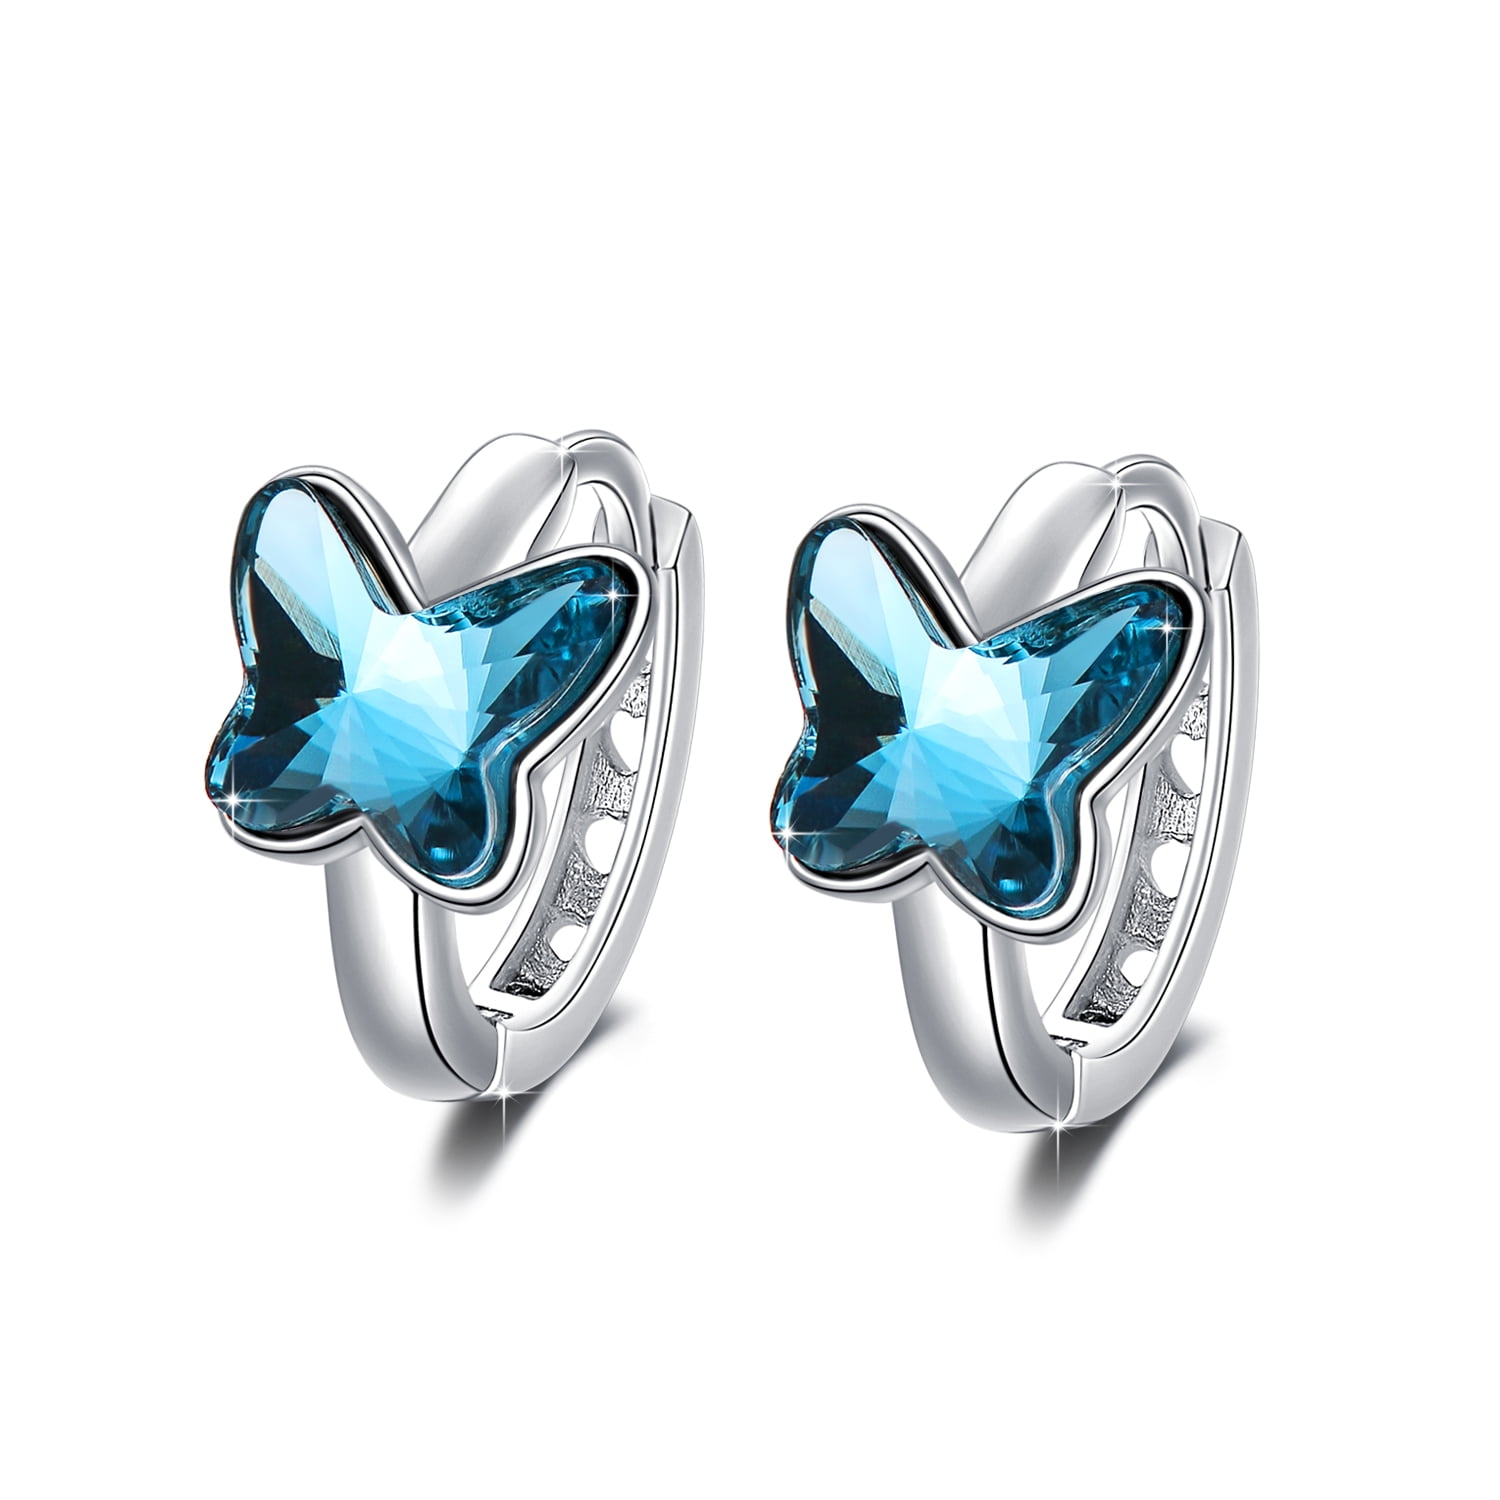 Childrens Earring 925 Sterling Silver White Gold Tone Crystal Butterfly New 